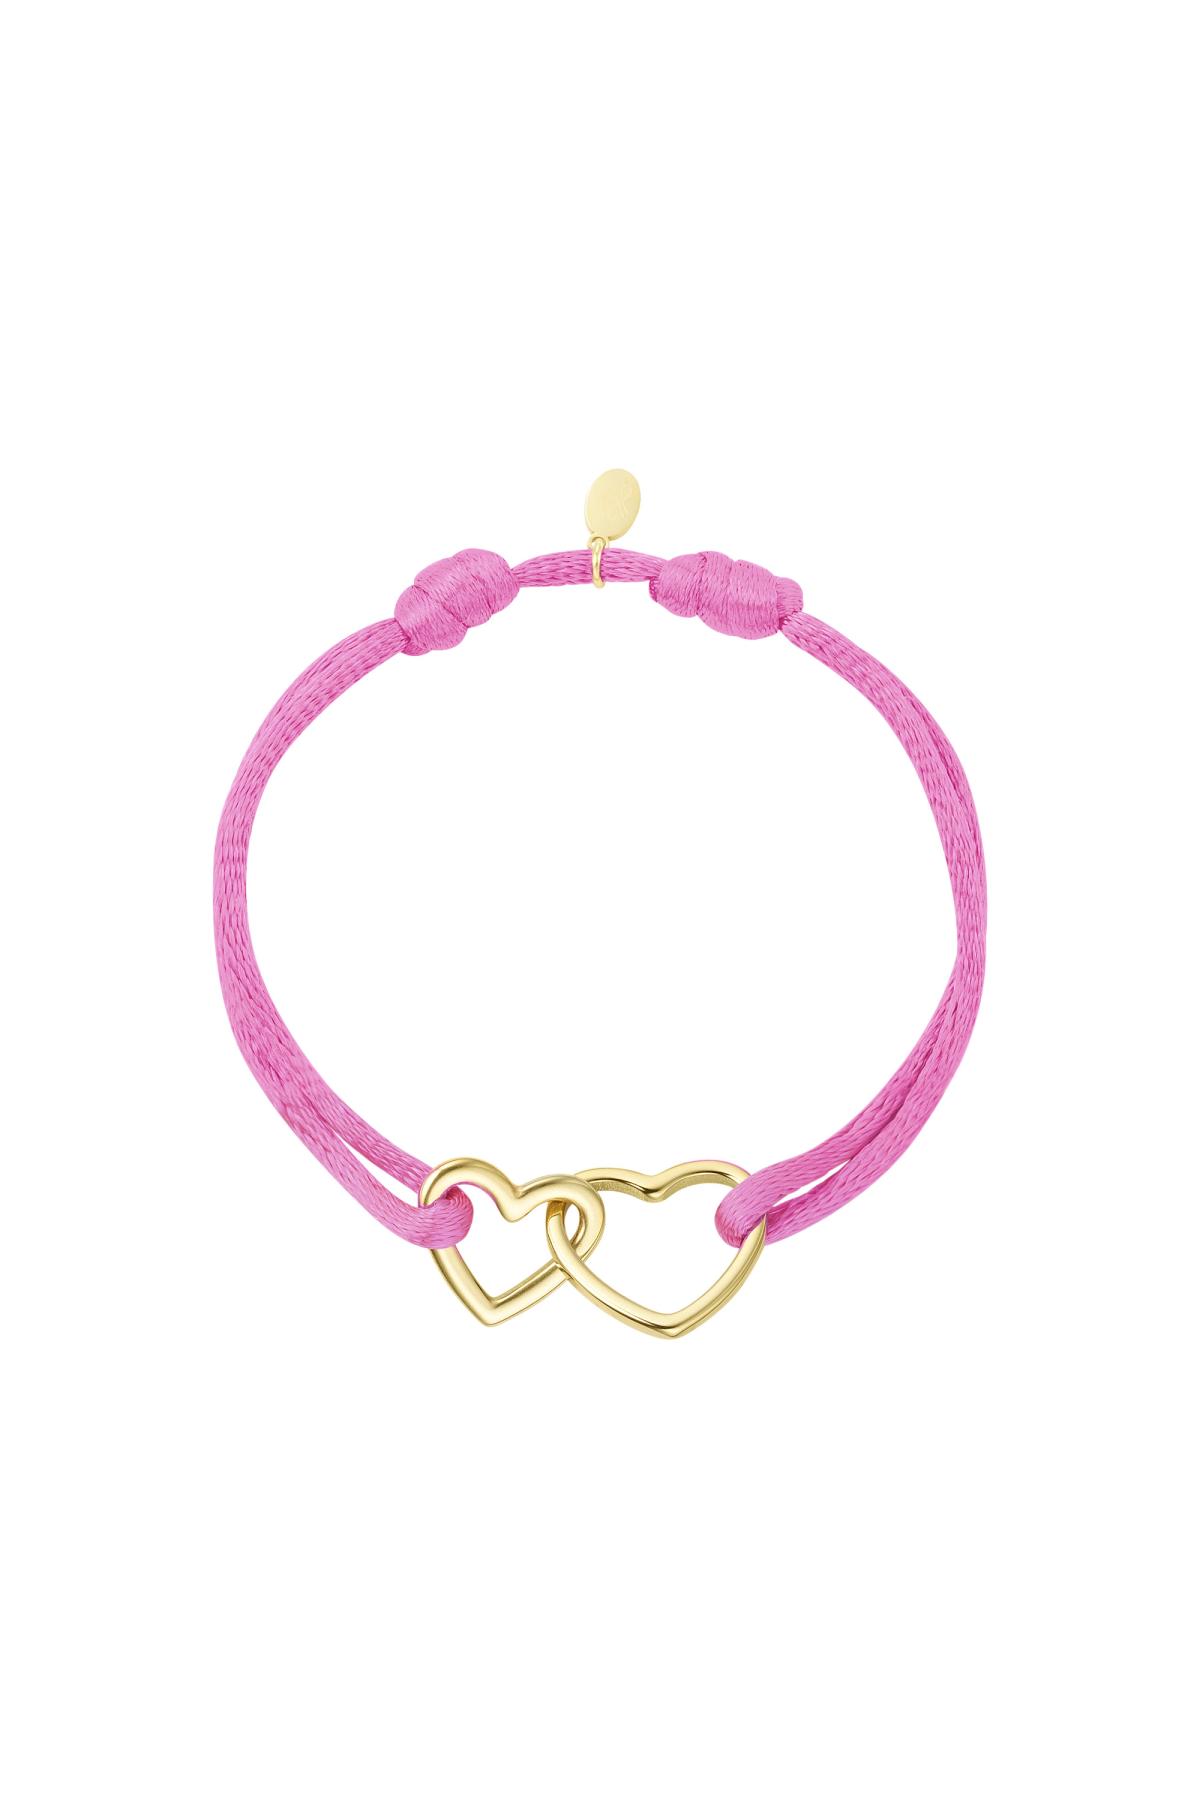 Pink & Gold Afbeelding12